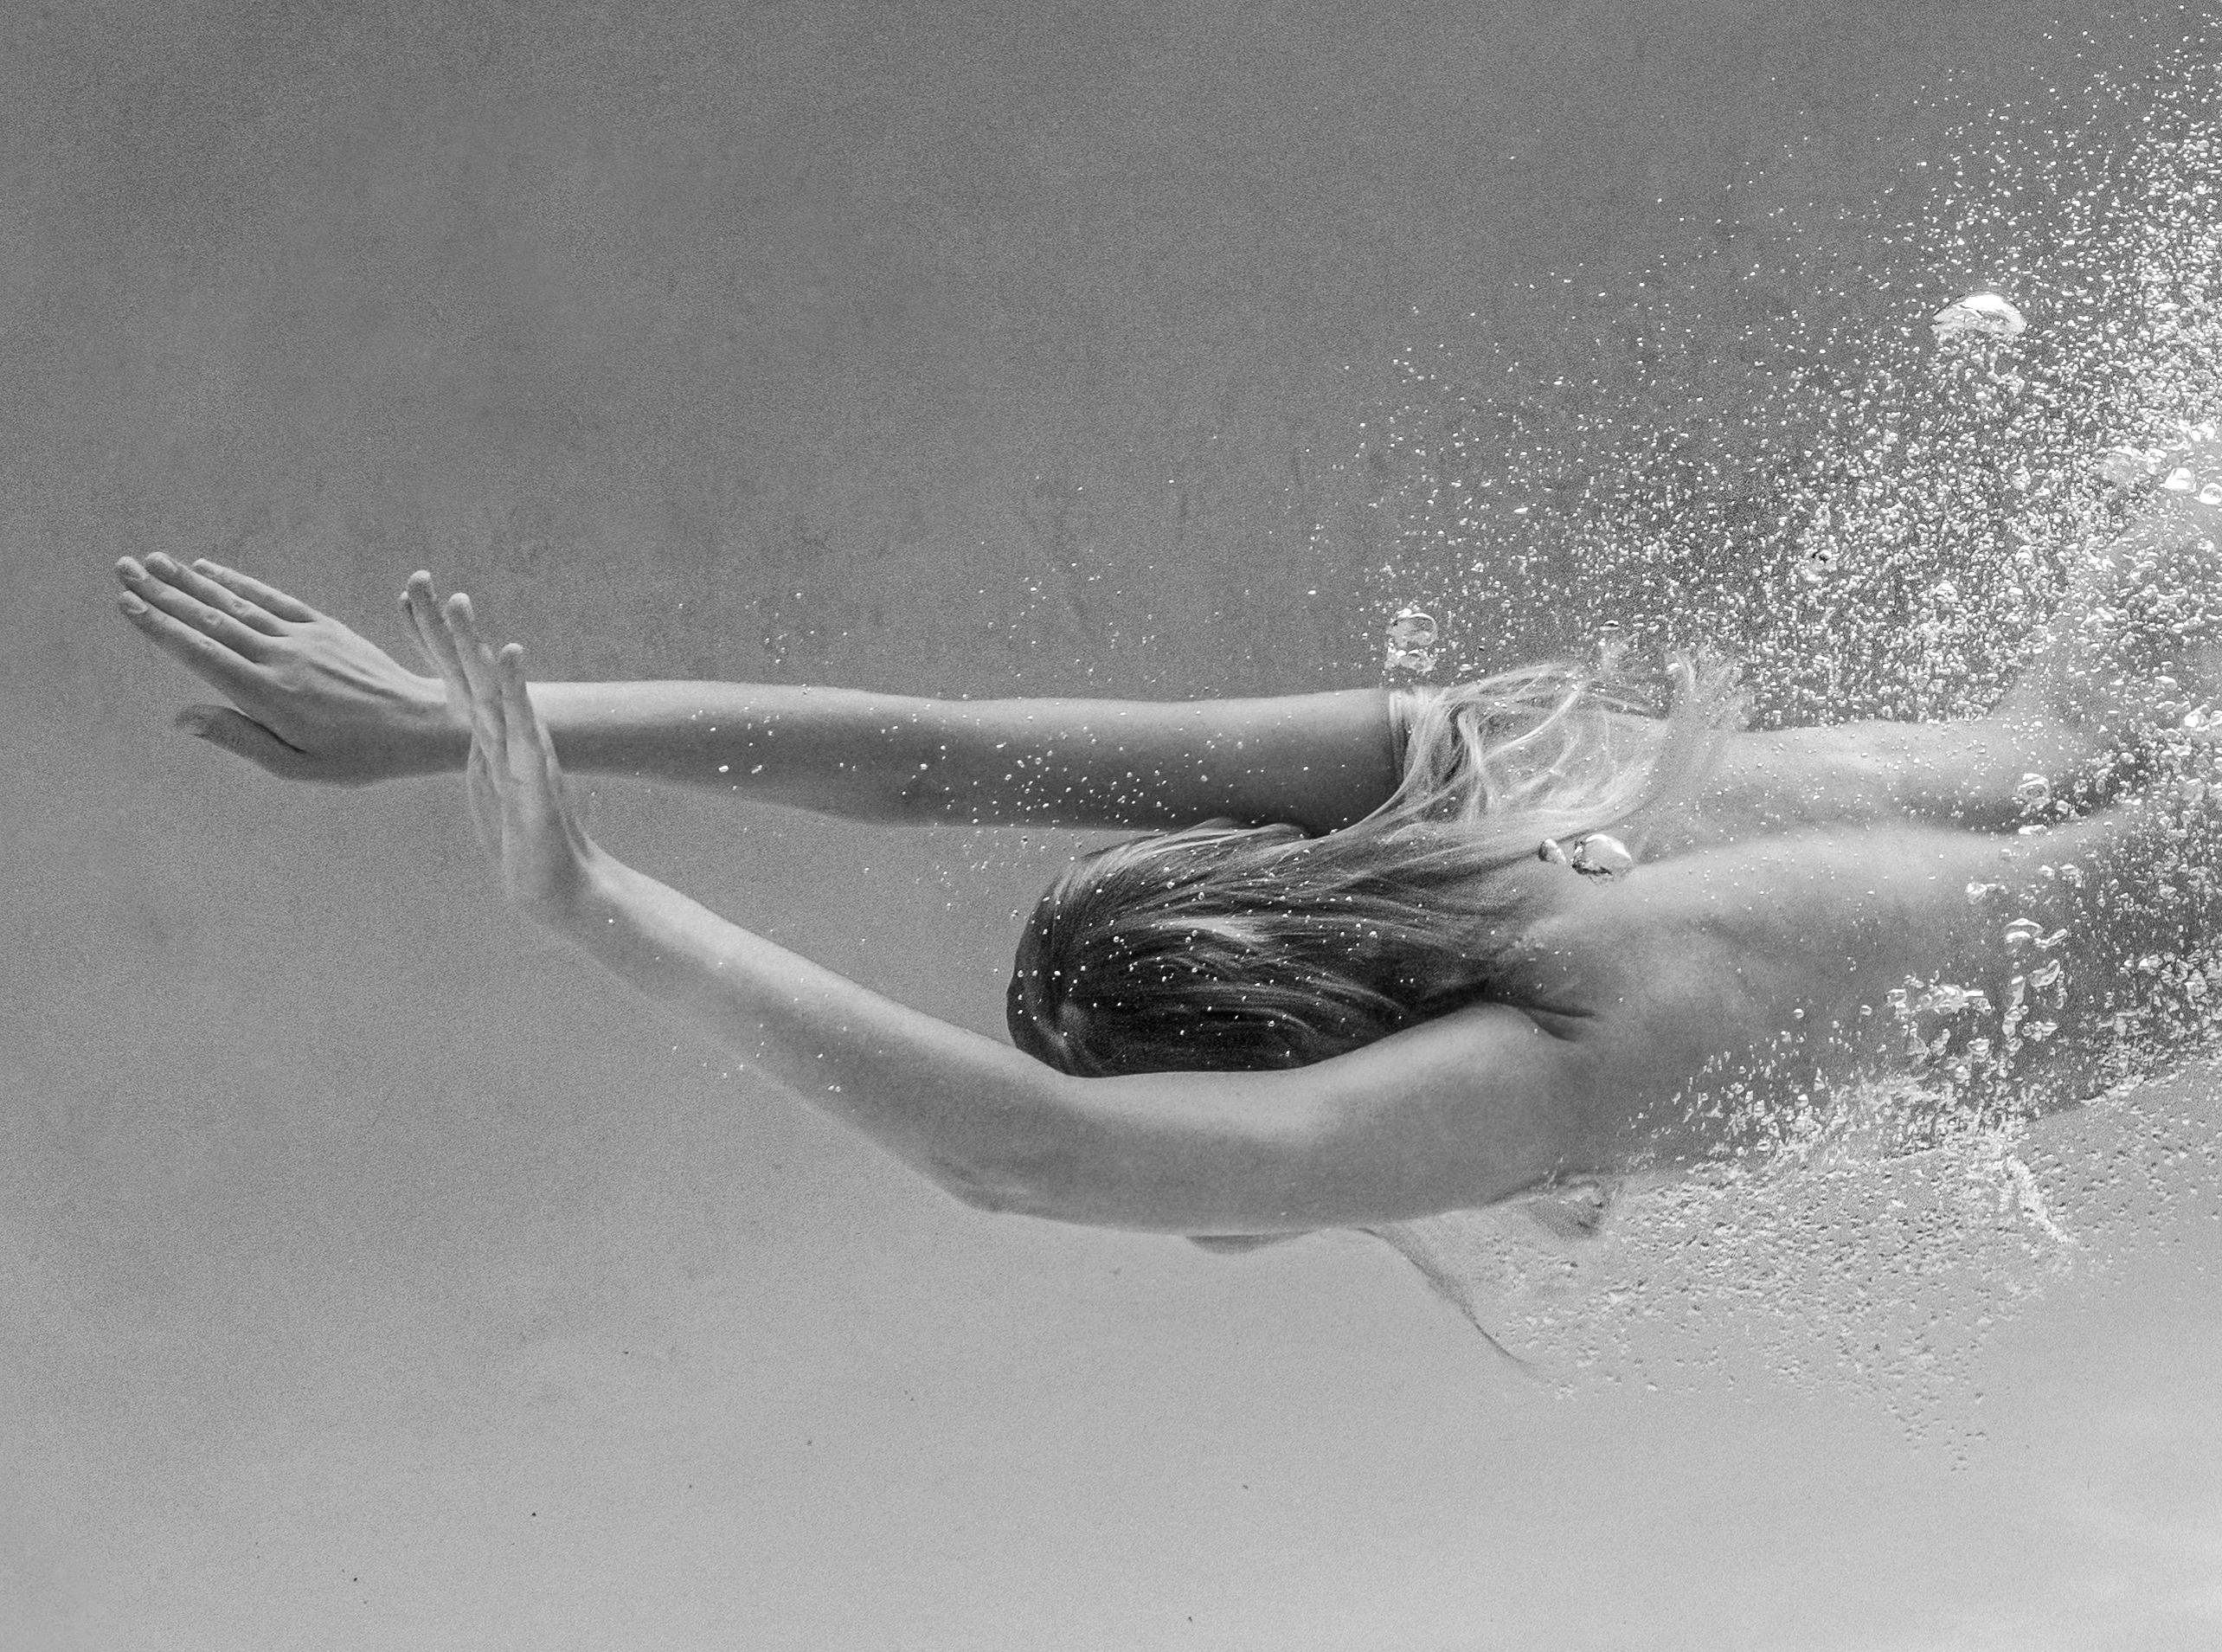 Under - underwater black & white nude photograph - archival pigment print 24x35 - Contemporary Photograph by Alex Sher